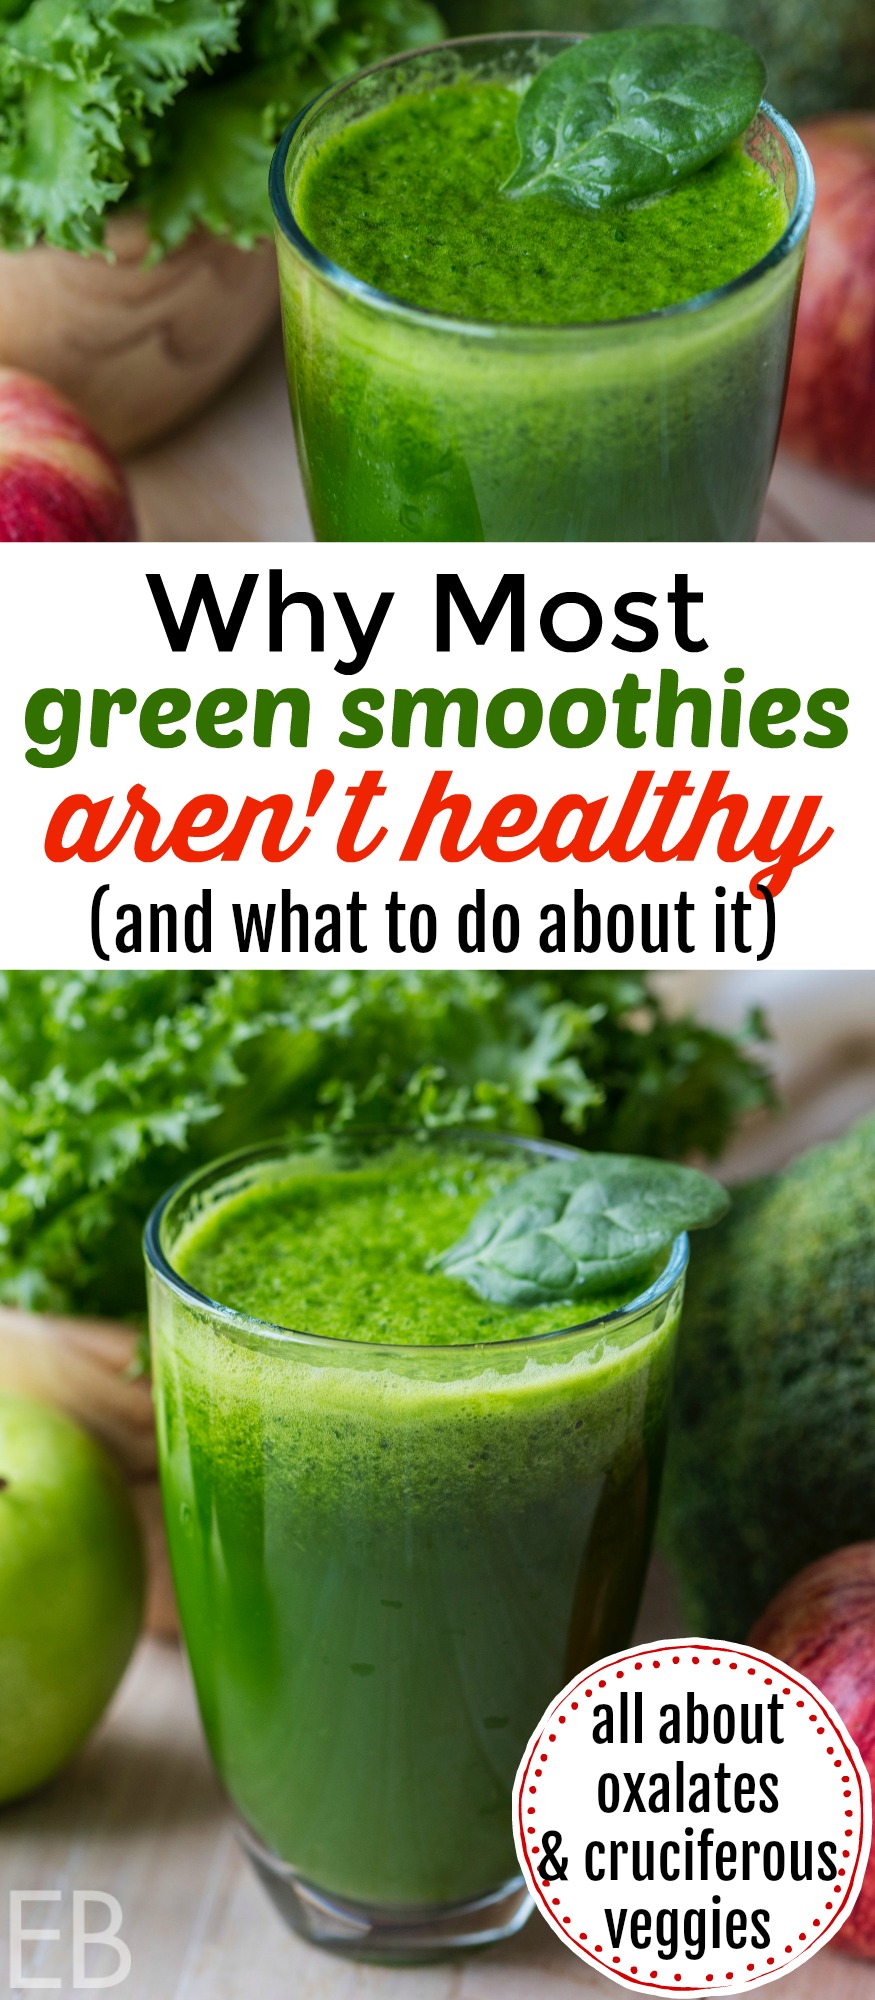 Why Most Green Smoothies Aren't Healthy~ Learn about oxalates, cruciferous veggies and how to make your green smoothies healthy! #greensmoothie #healthy #autoimmune #oxalate #cruciferous #ferment #cookedfood #traditional #paleo